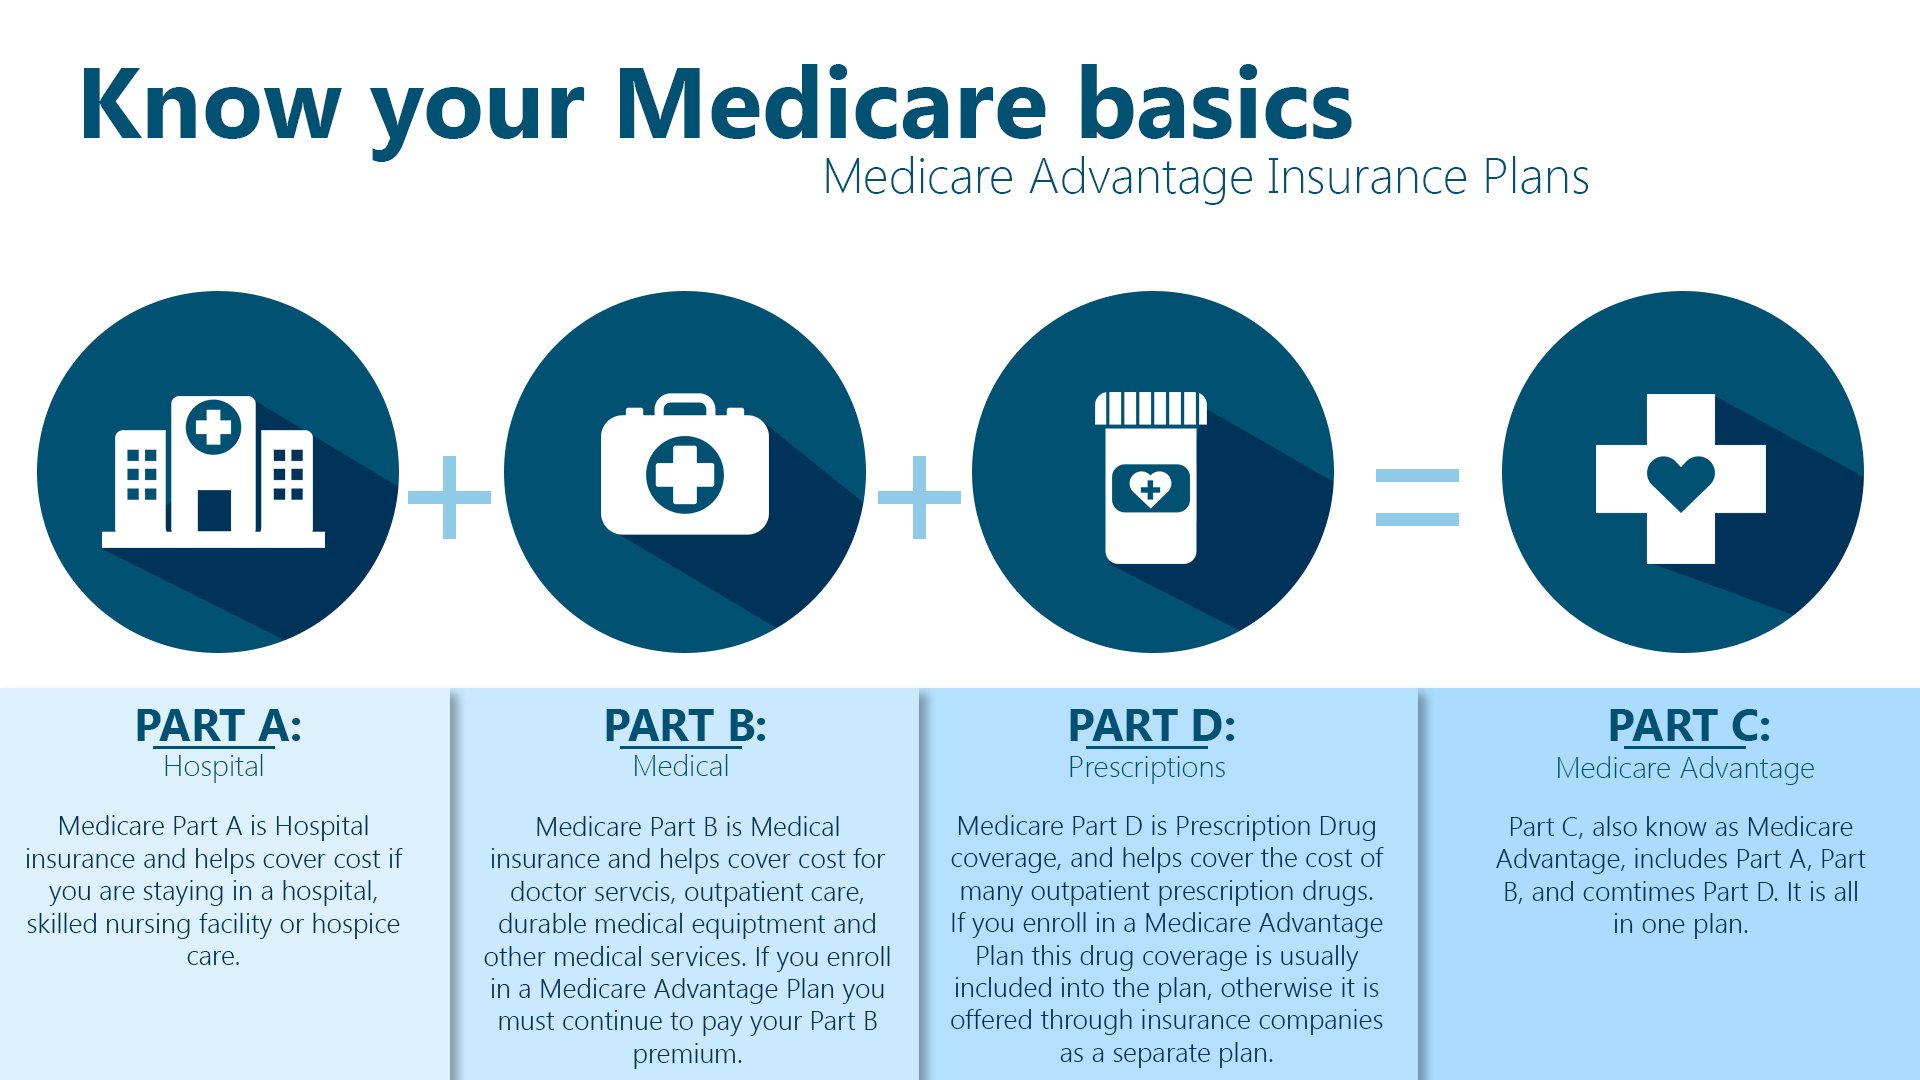 Know your Medicare basics